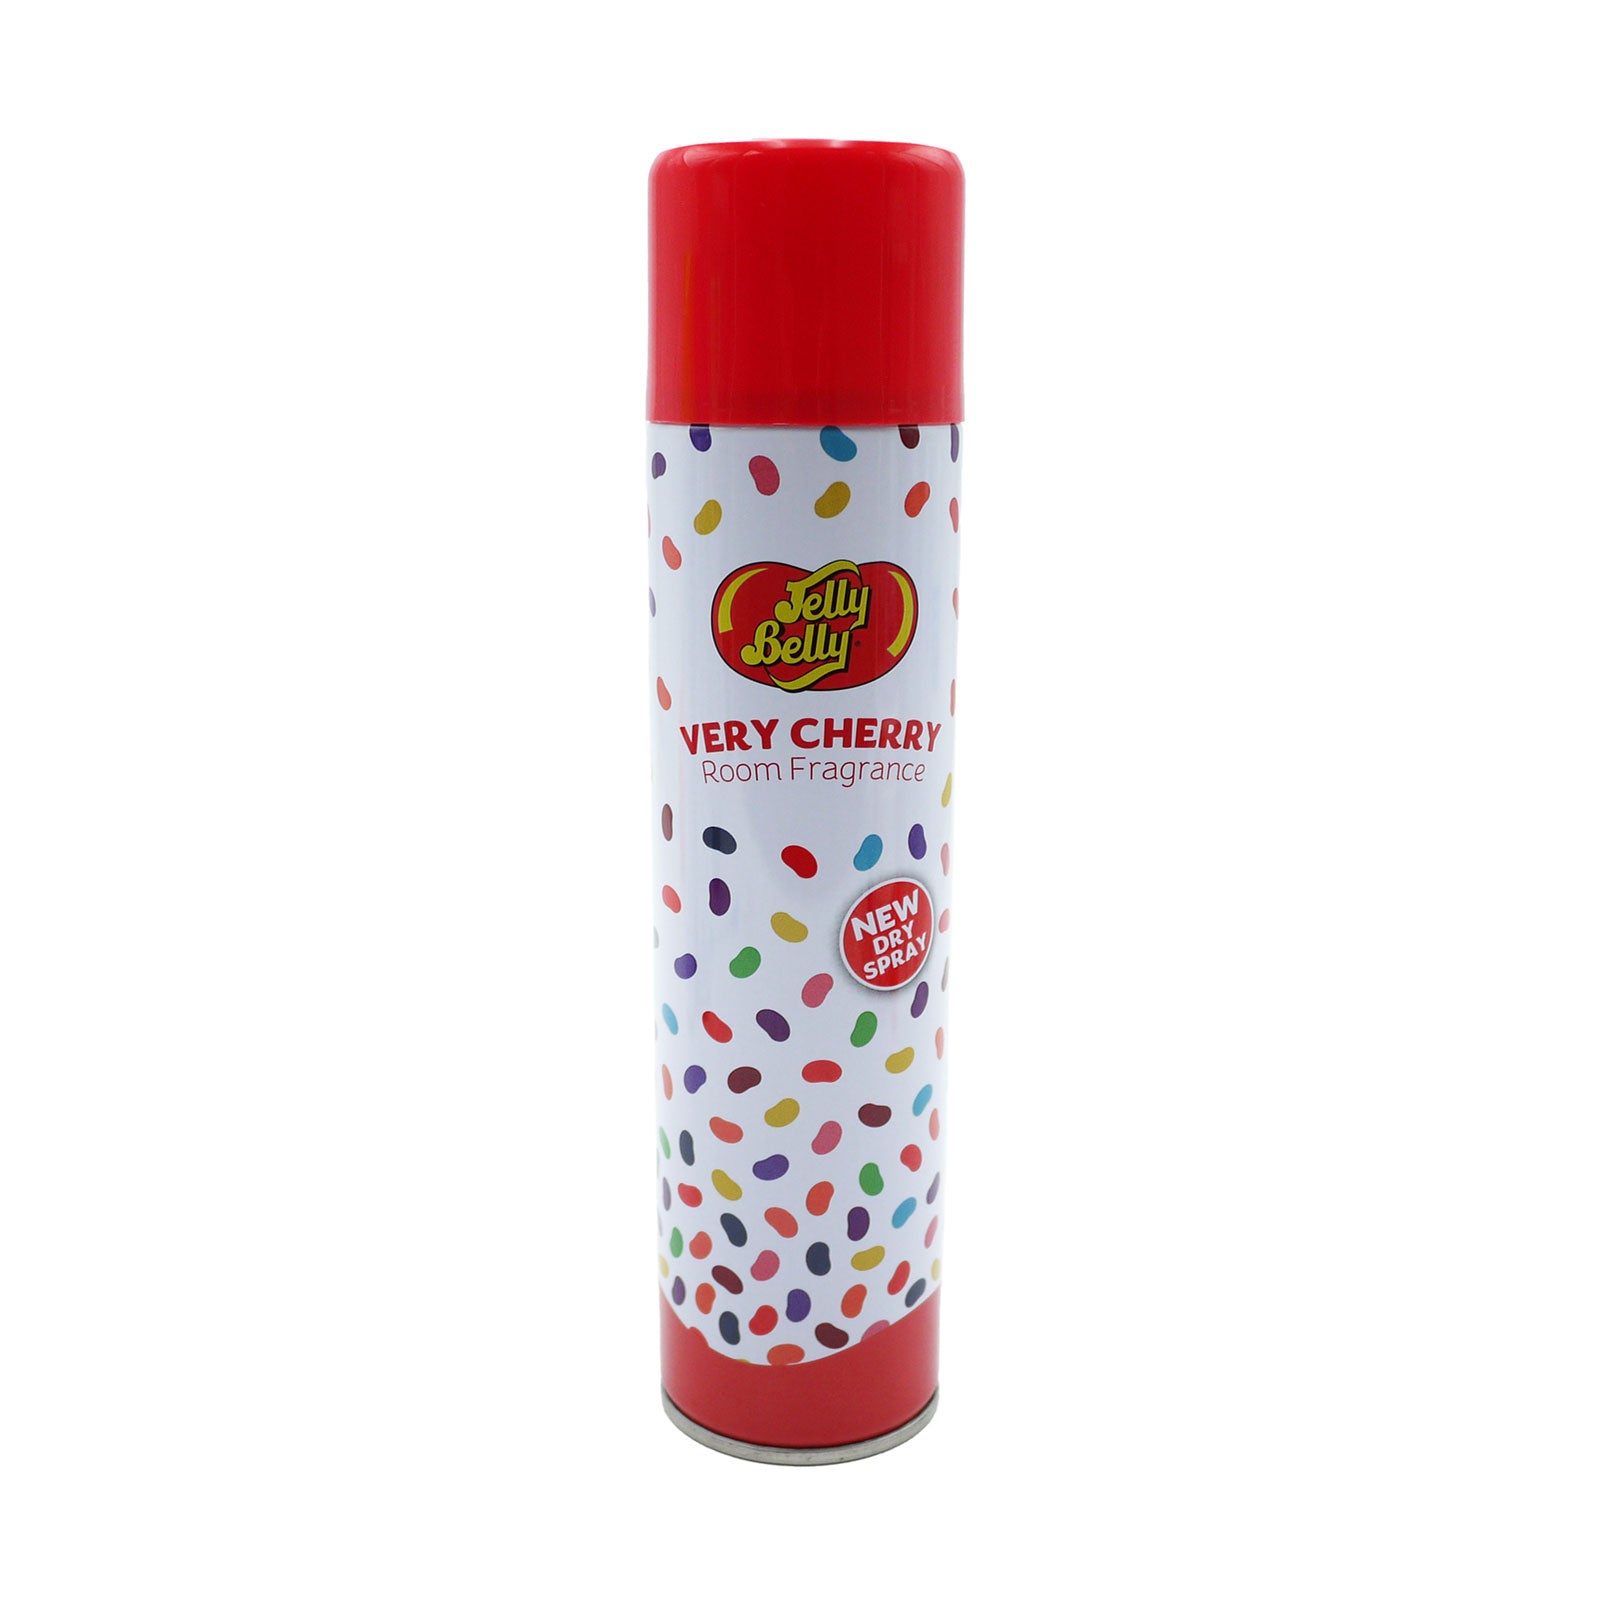 Jelly Belly Very Cherry Room Fragrance